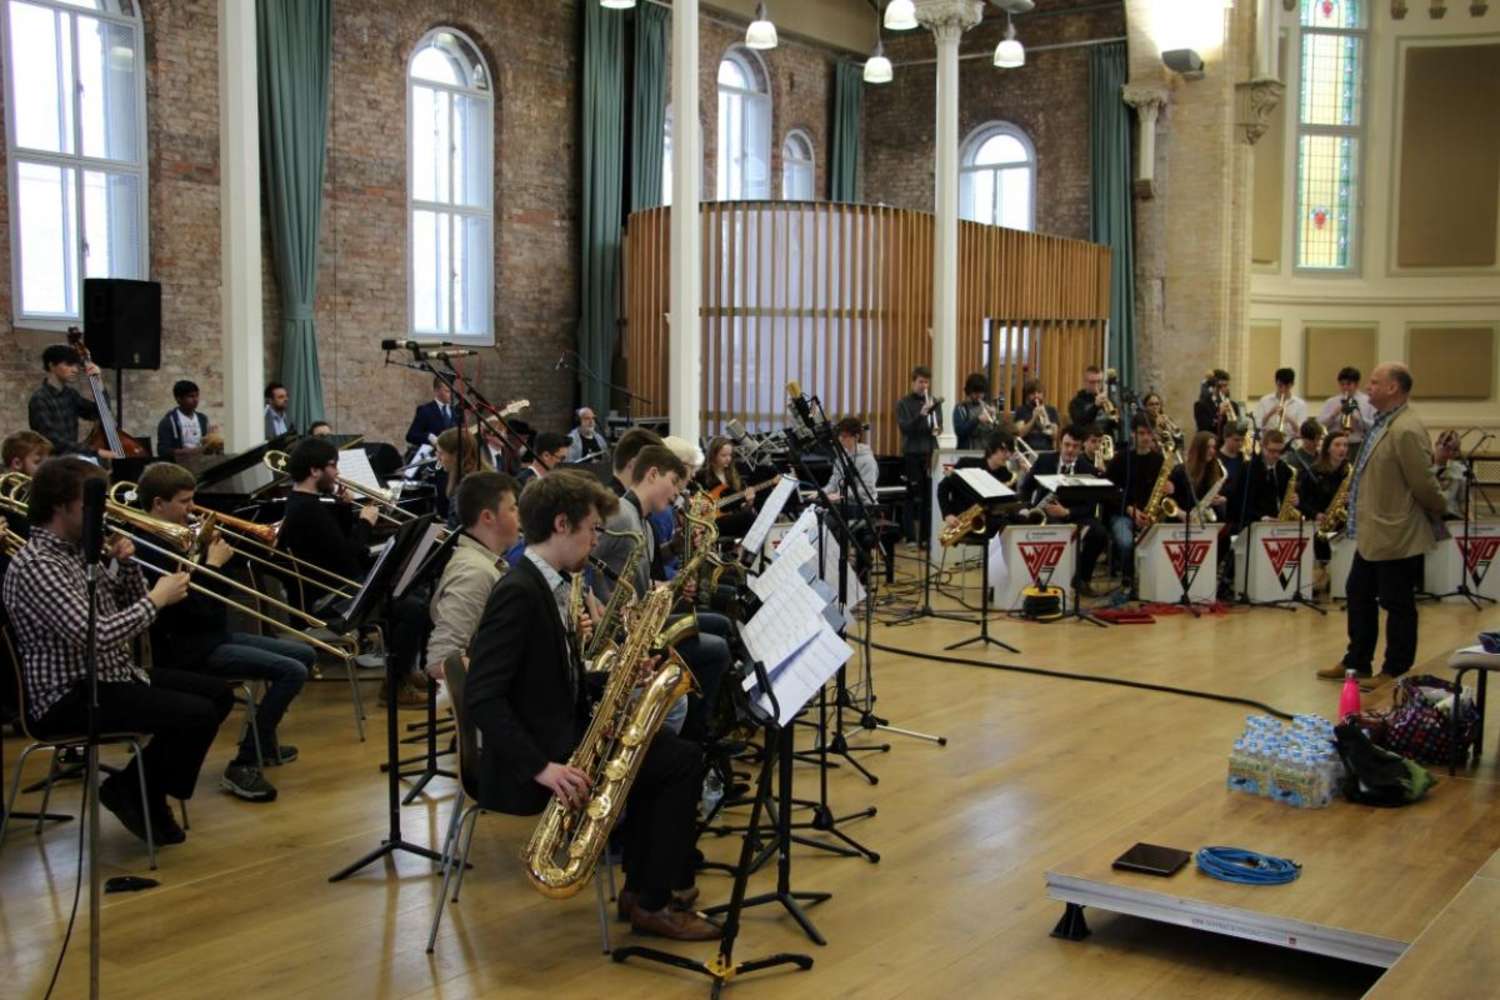 NYOS Jazz Orchestra & Wigan Youth Jazz Orchestra rehearsing ahead of the Double Big Band performance at HallÃ© St Peter's, Manchester